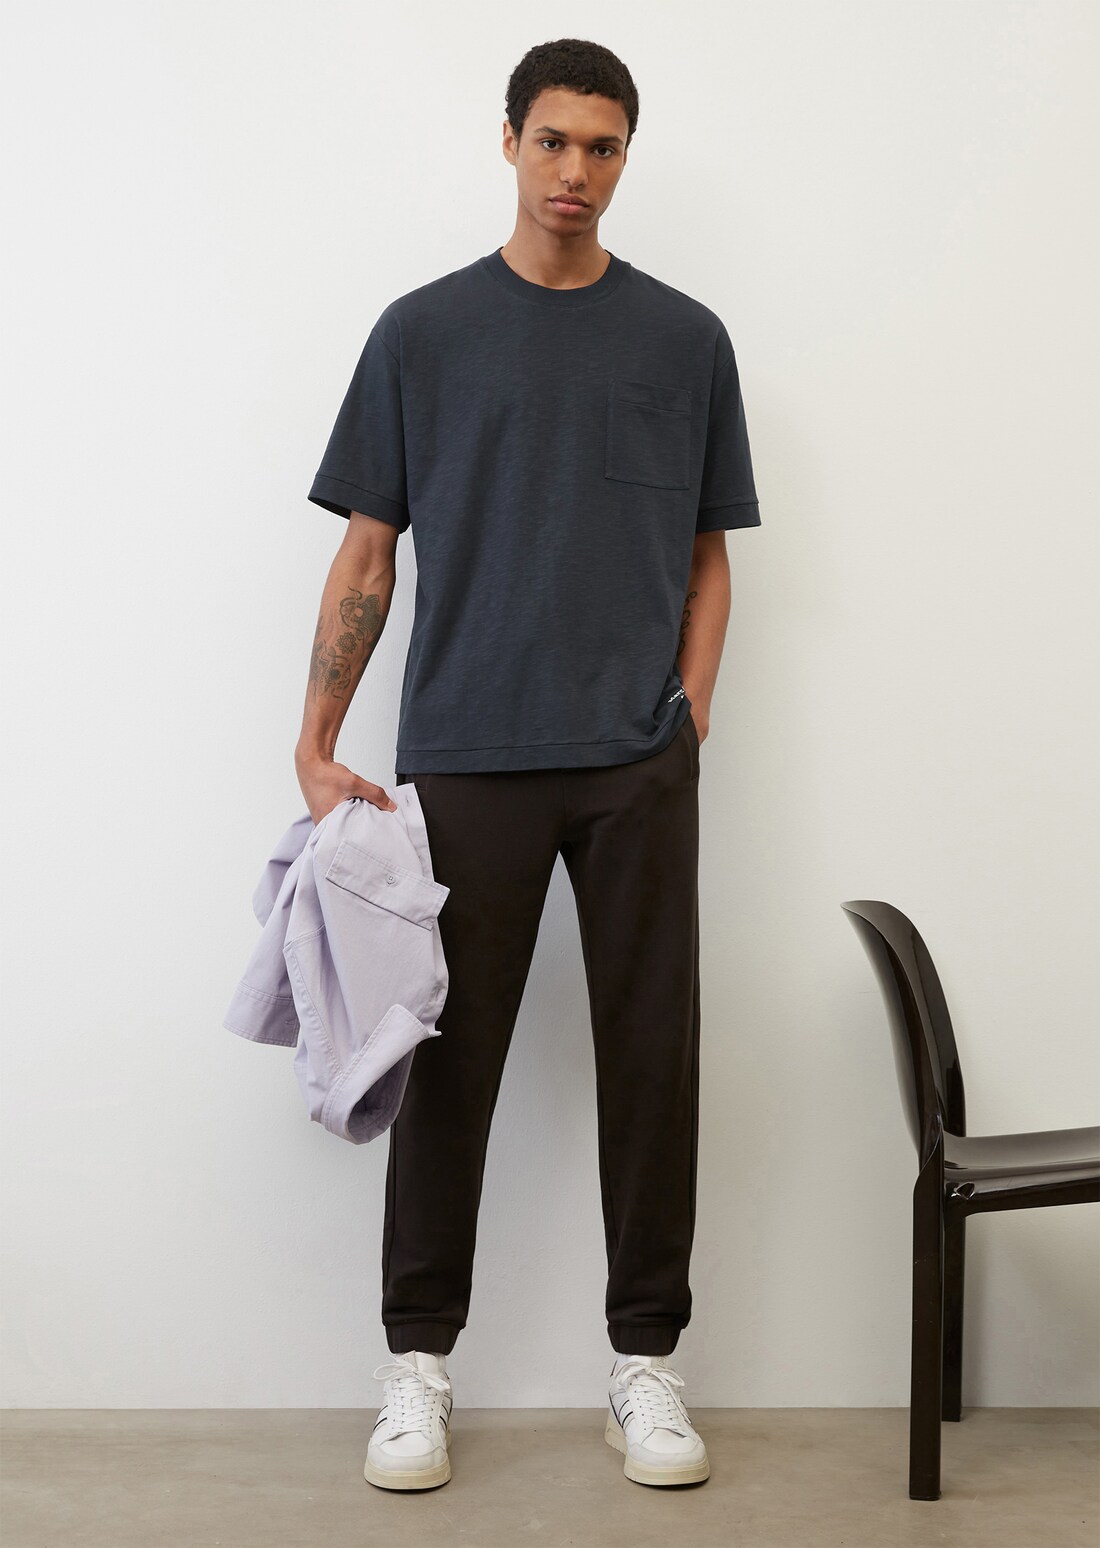 Slub jersey T-shirt, relaxed fit From Organic Cotton - blue | Short ...